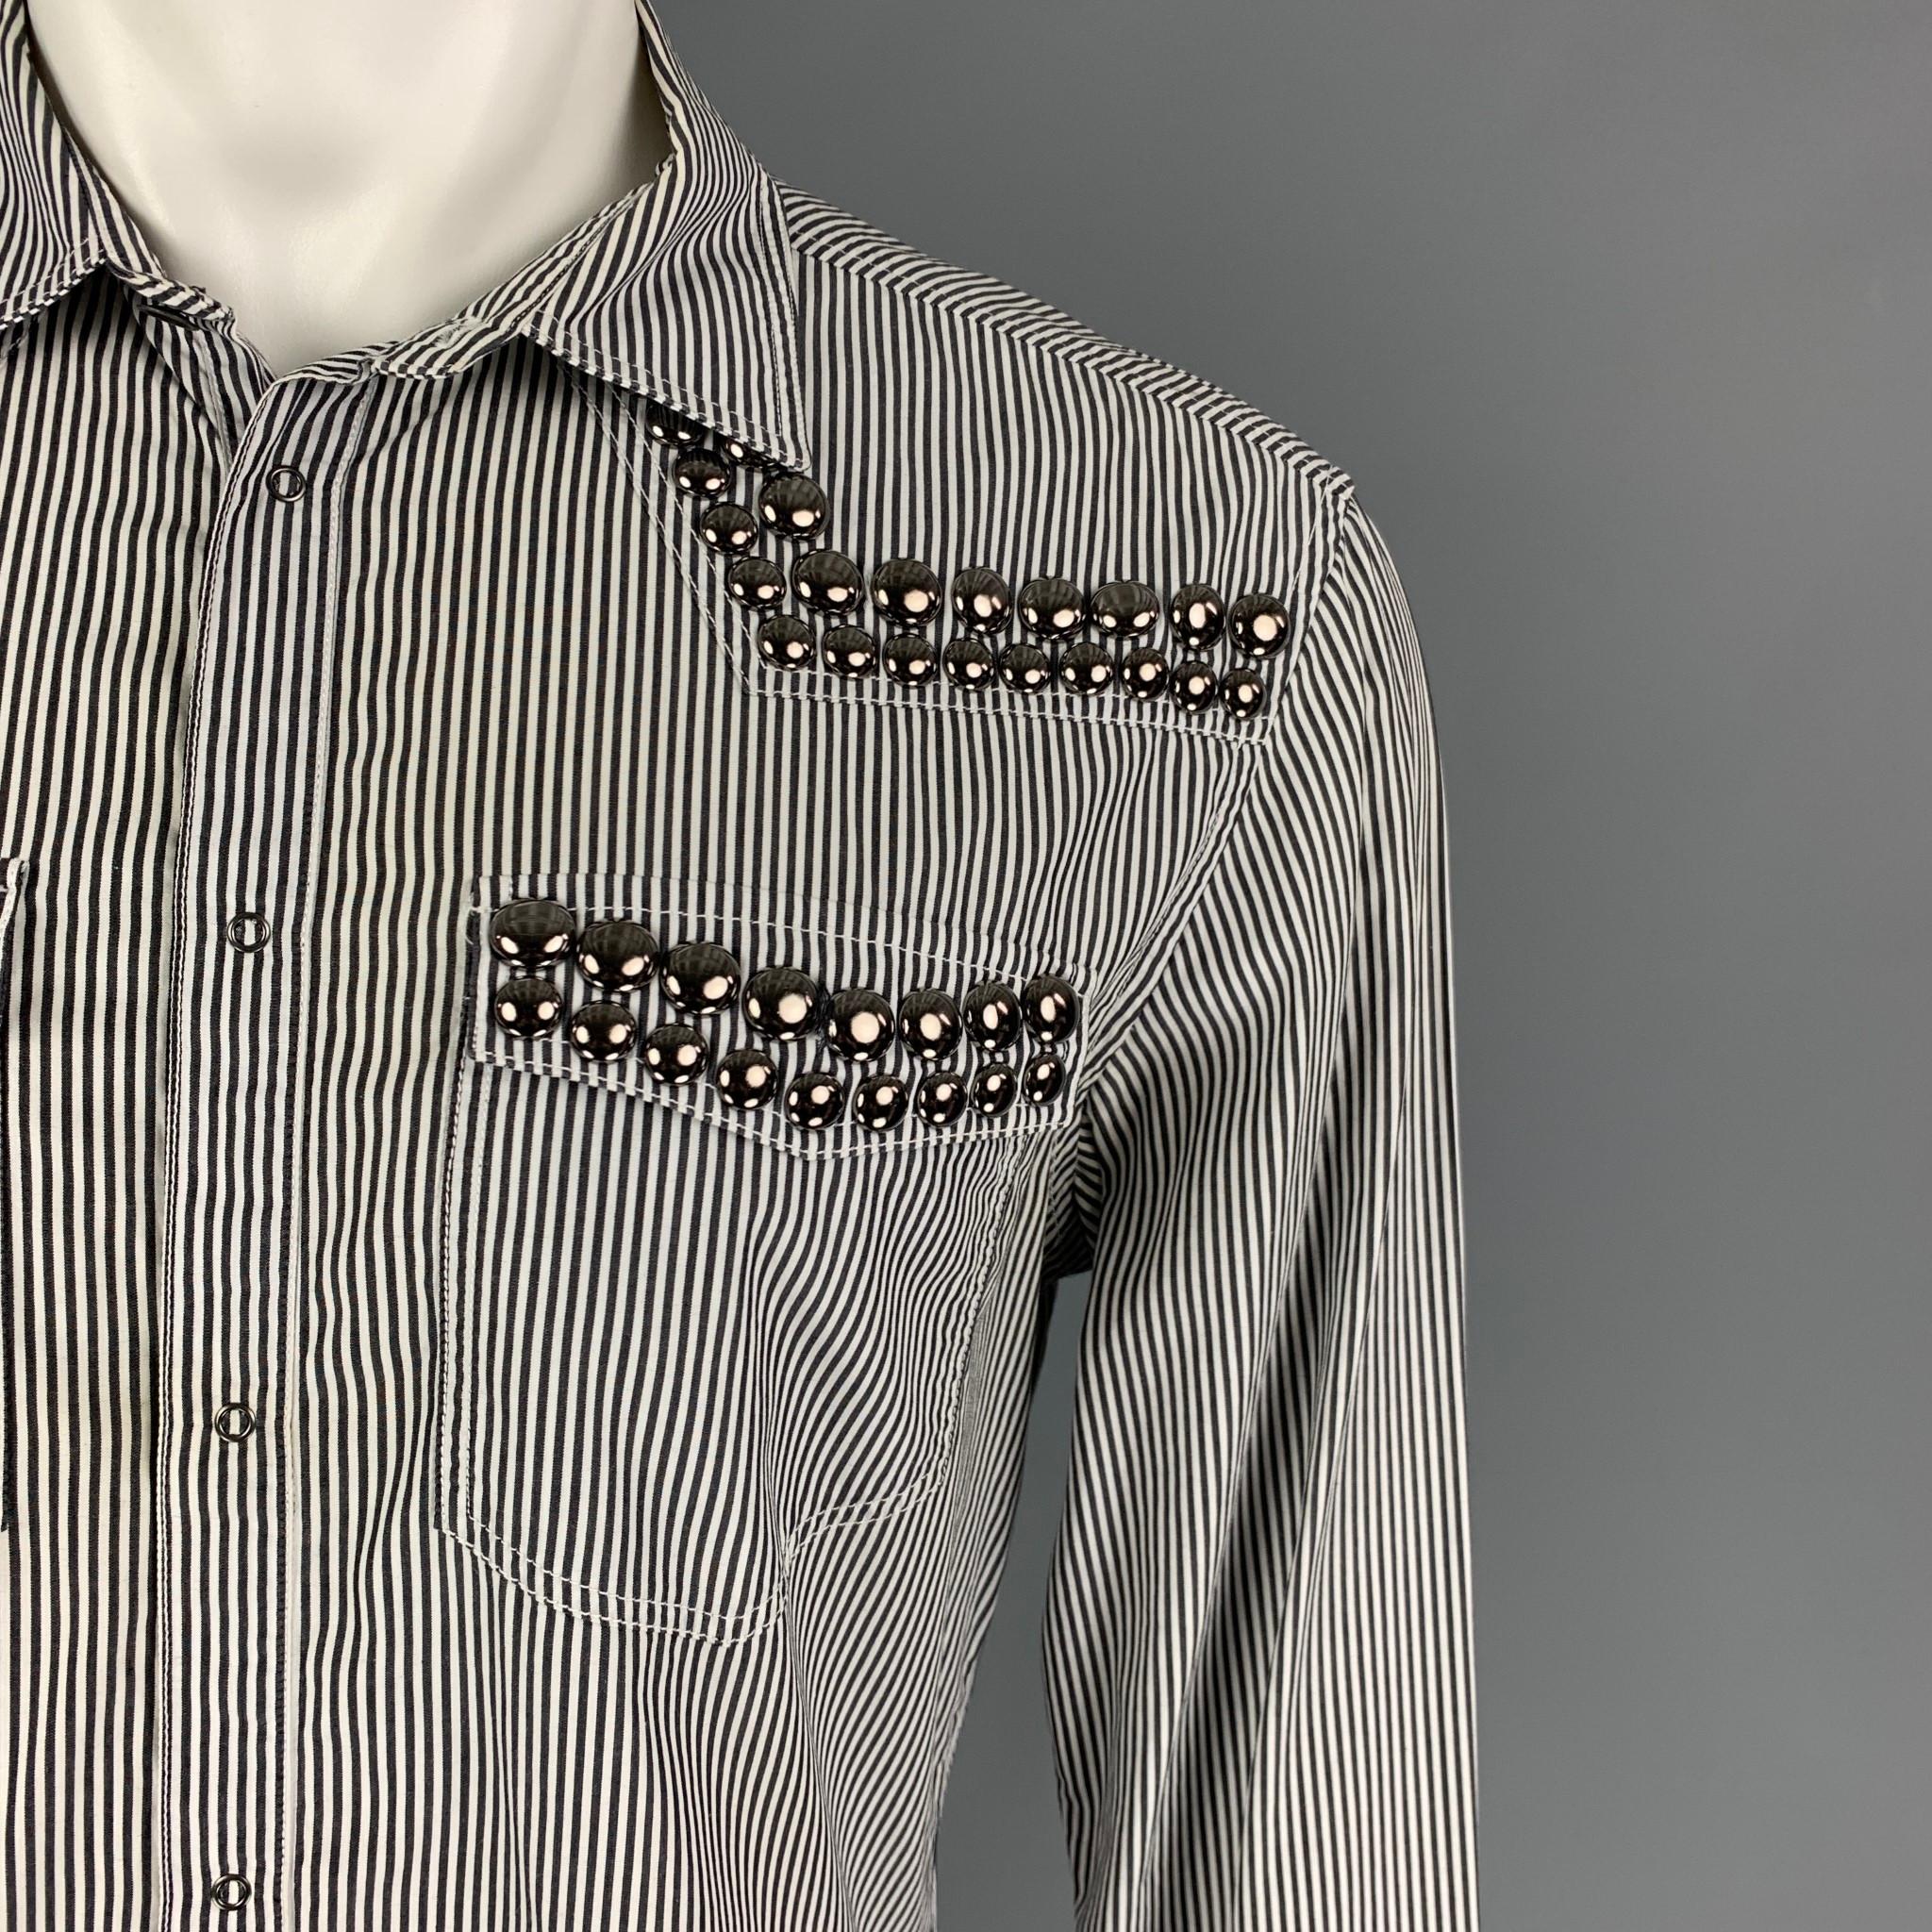 PIERRE BALMAIN long sleeve shirt comes in a black & white stripe cotton featuring studded details, spread collar, and a snap button closure. Made in Italy.

Very Good Pre-Owned Condition.
Marked: 36/50

Measurements:

Shoulder: 19 in.
Chest: 40